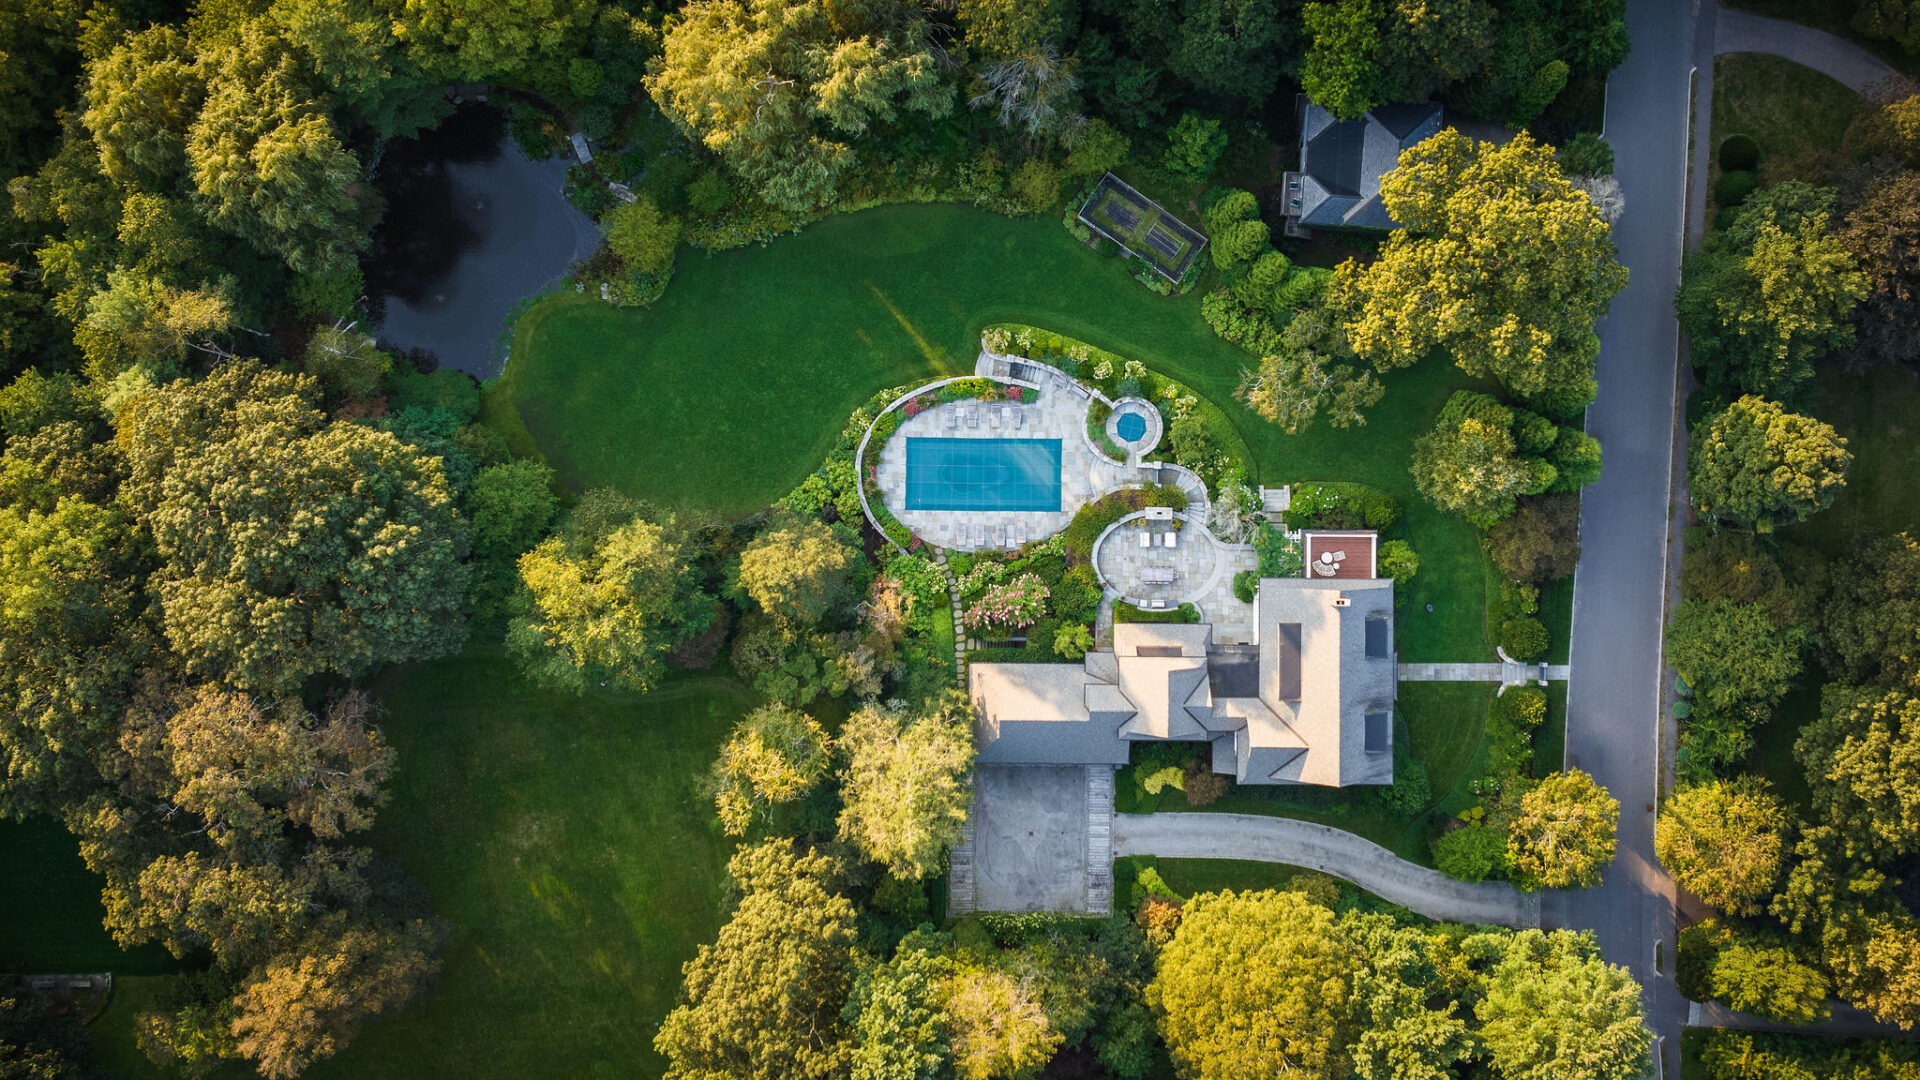 Aerial view of a luxurious estate with a large house, swimming pool, manicured gardens, surrounded by lush trees, and a winding driveway.